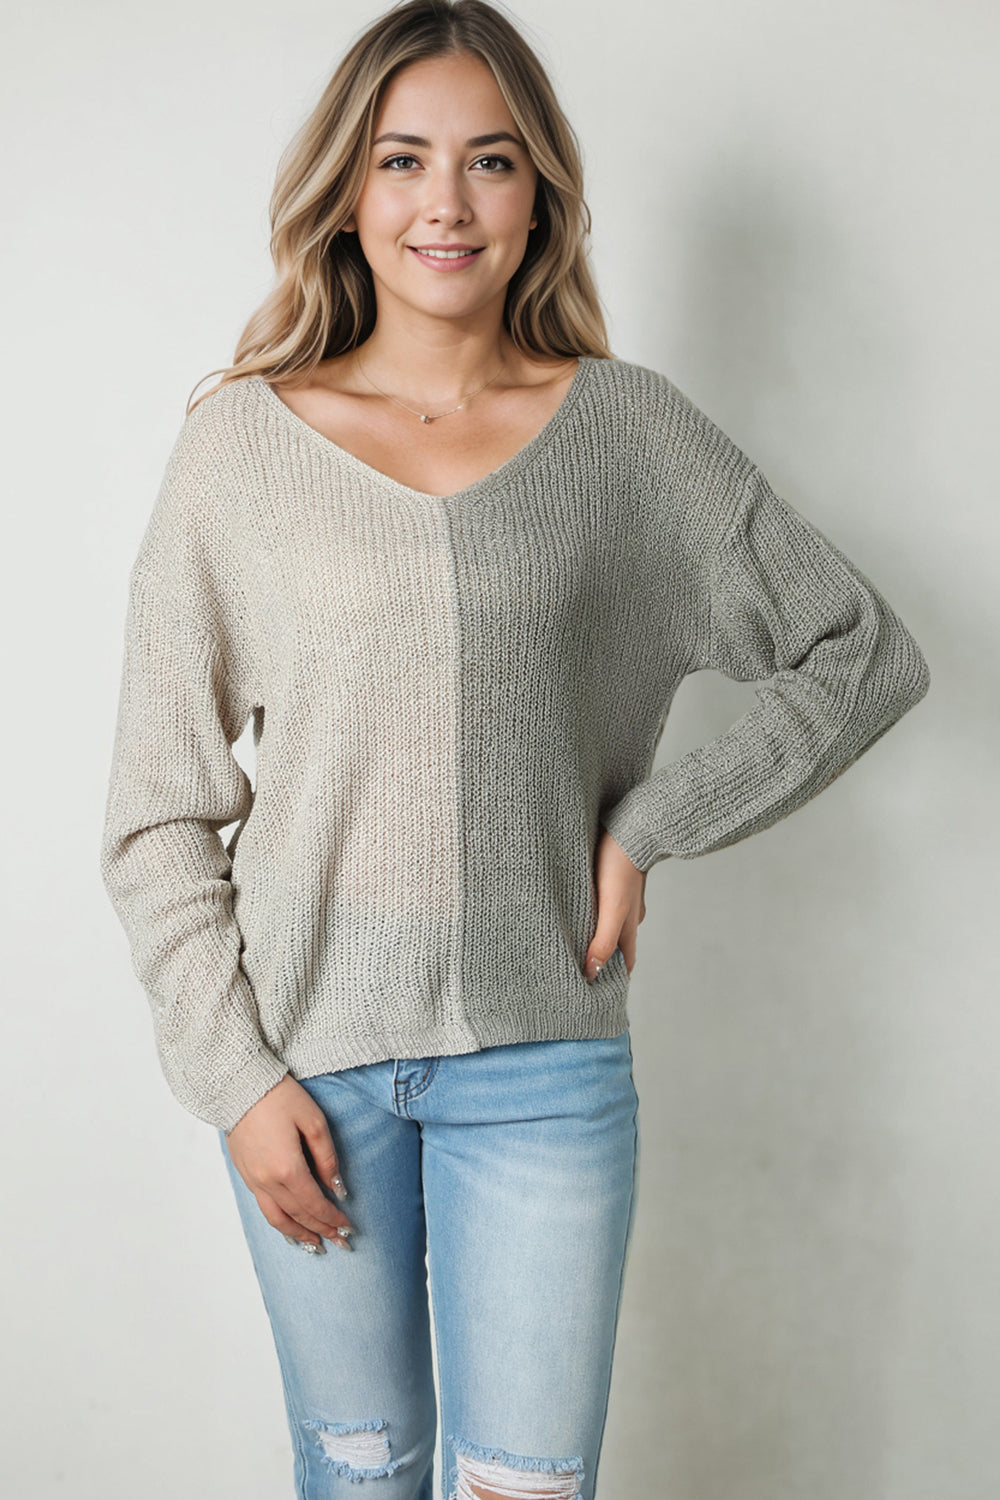 By Your Grace Contrast Sweater - Cheeky Chic Boutique